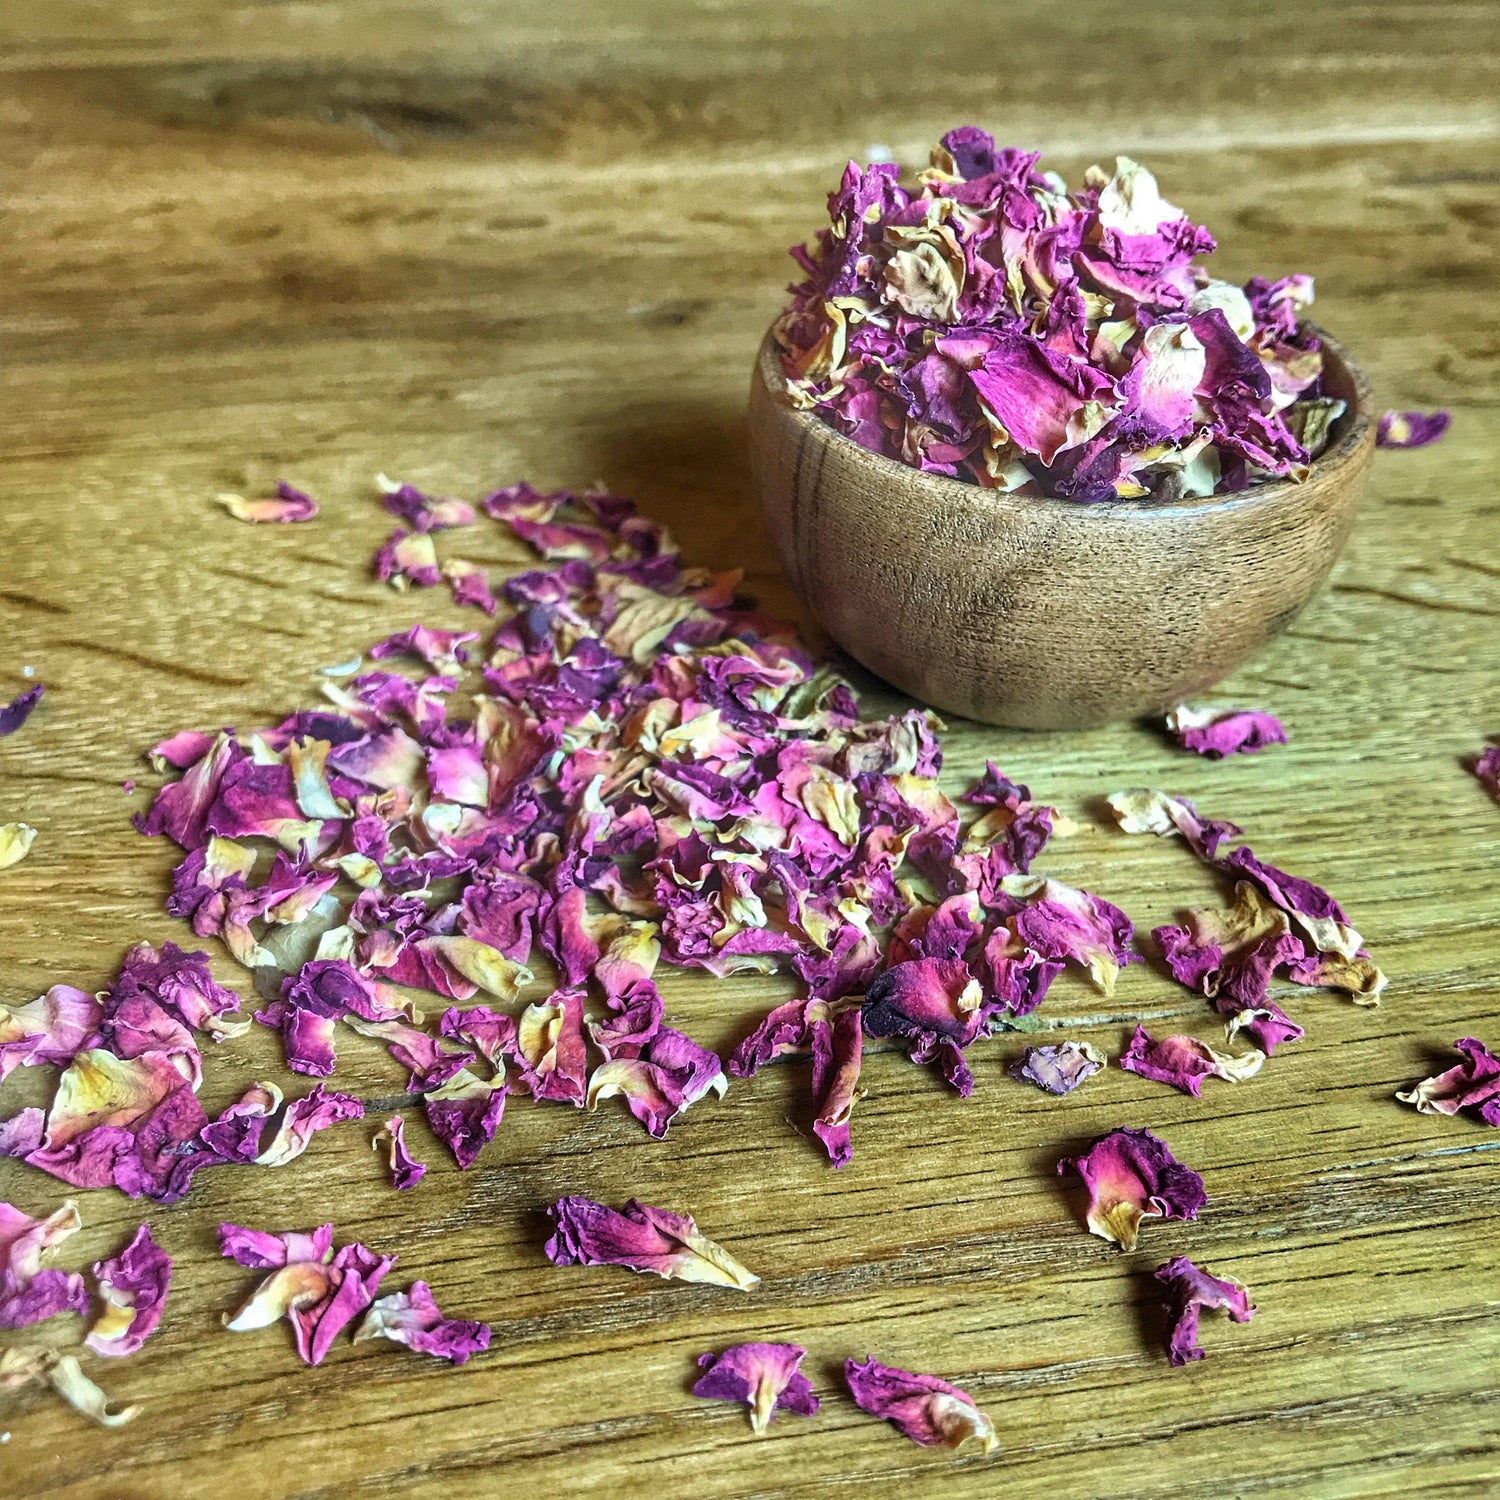 Dried rose petals from Sacred Plant Co, displayed in abundance.